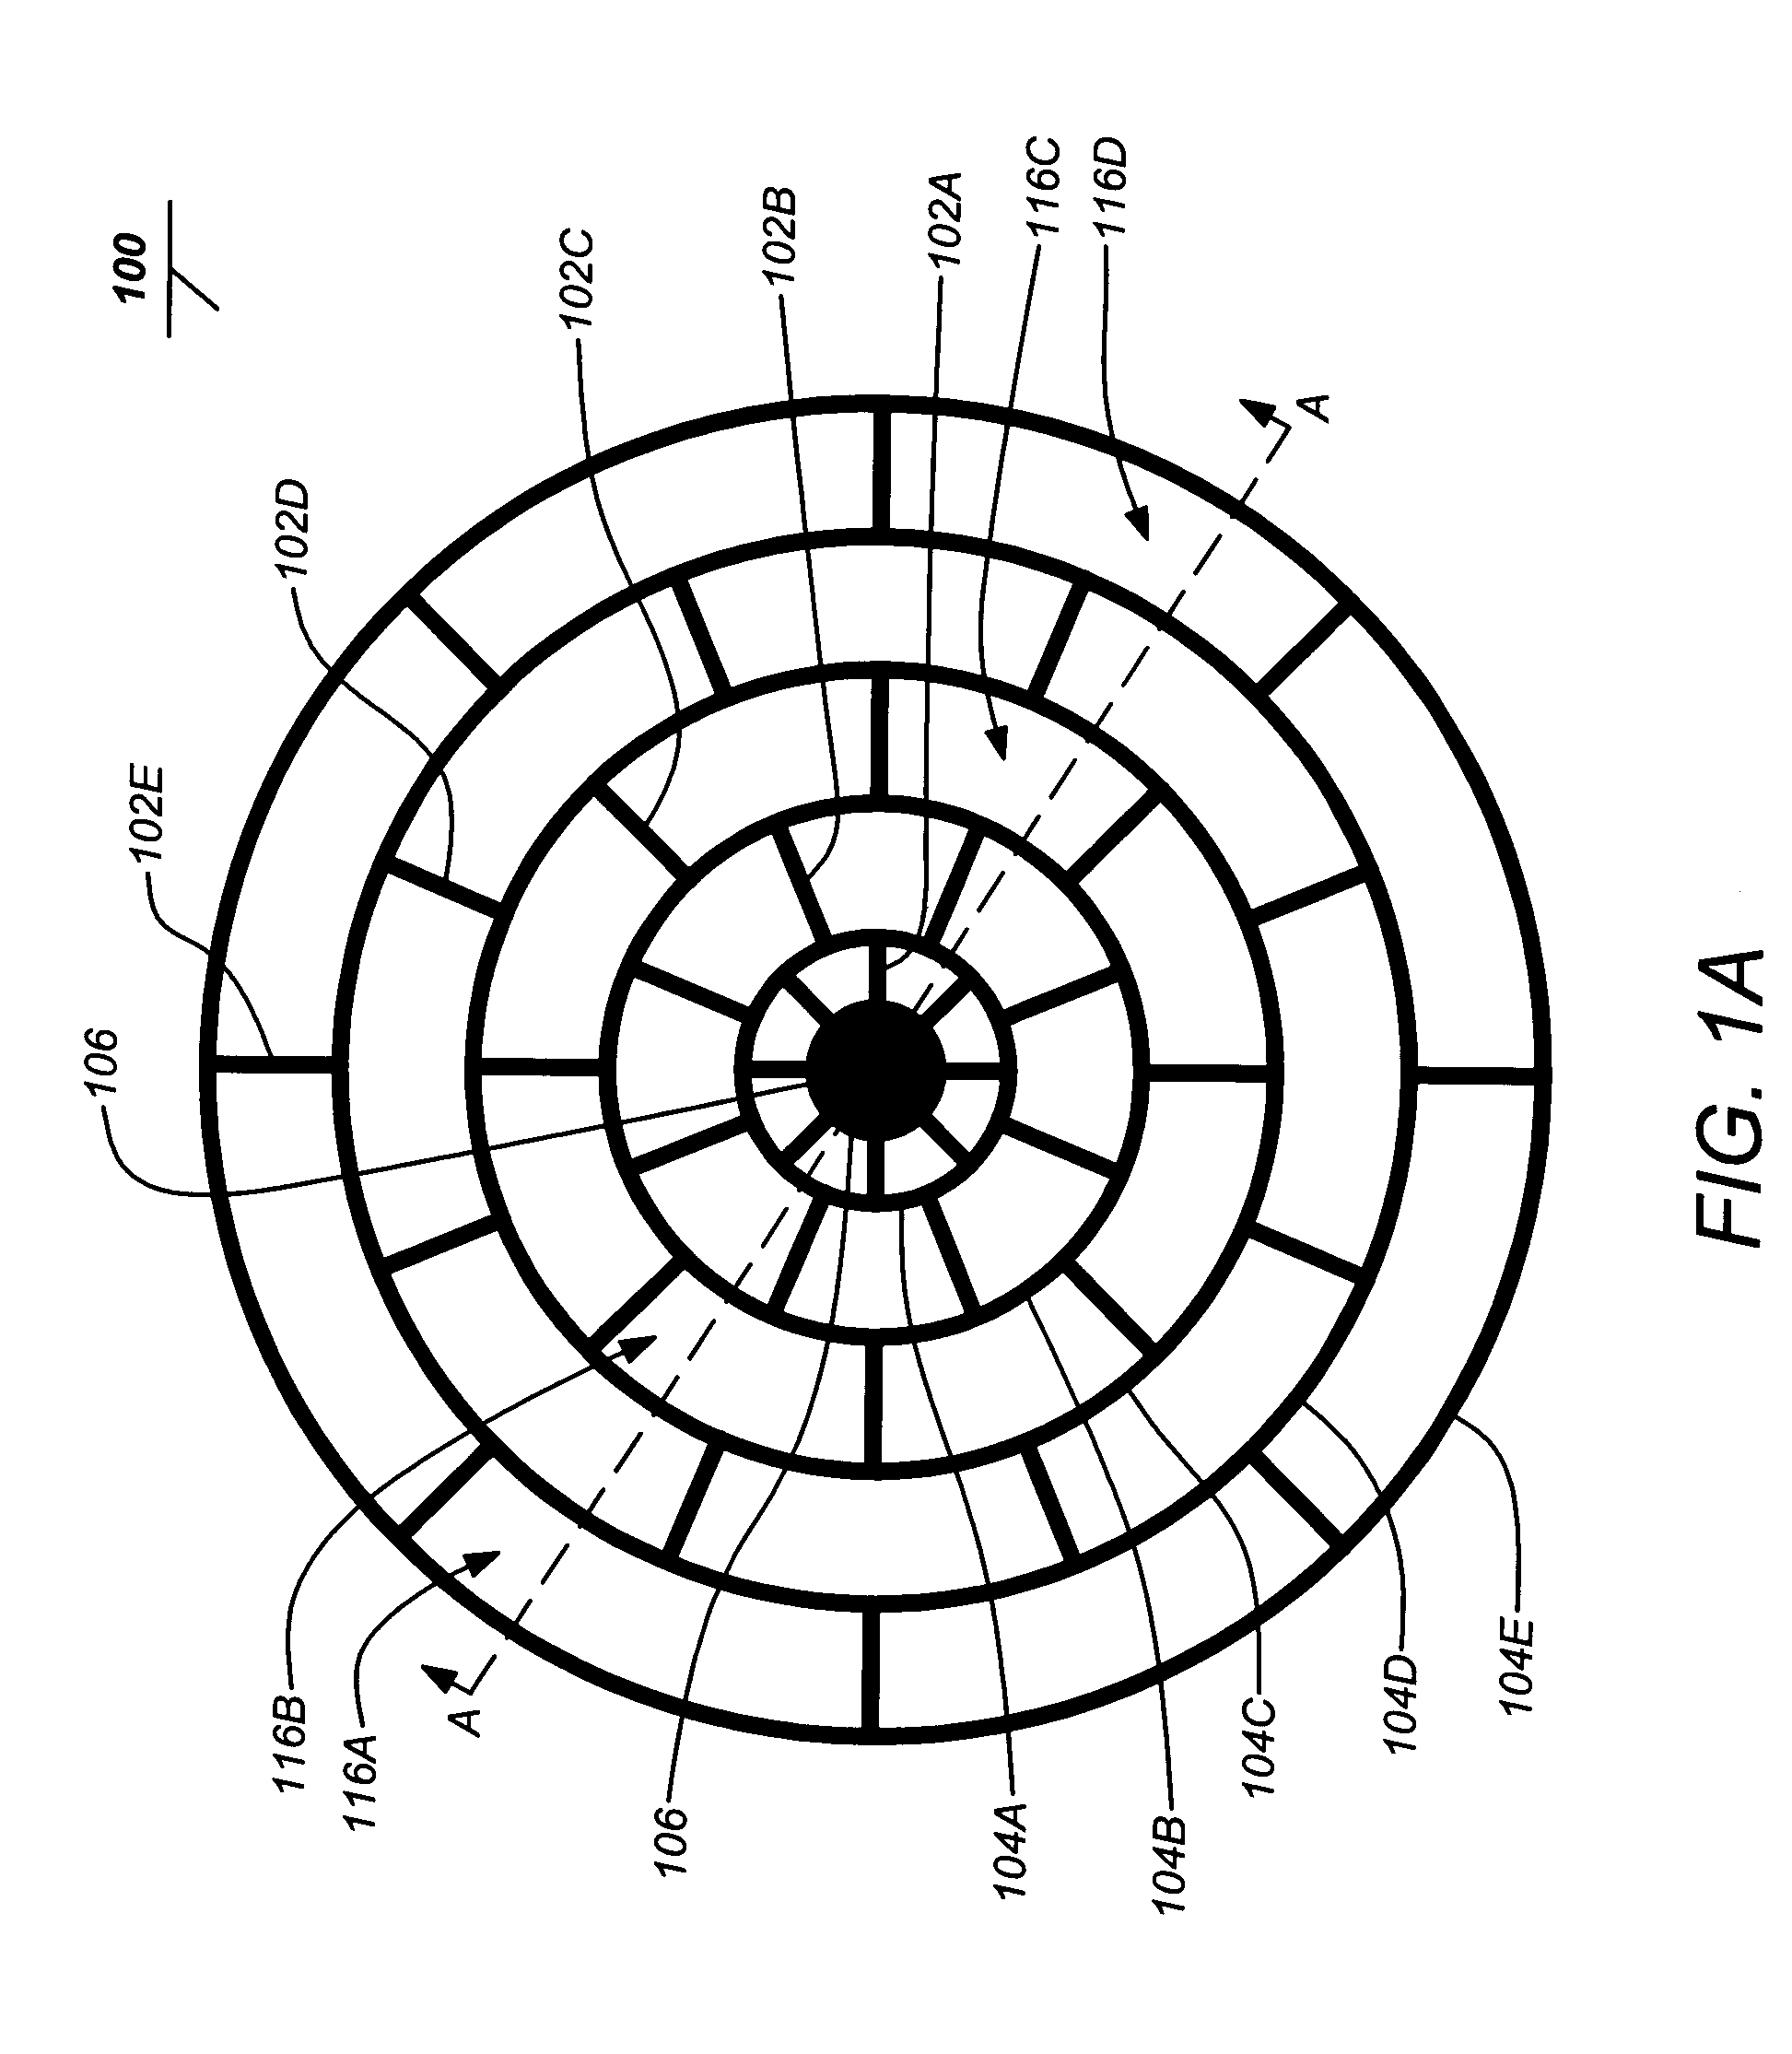 Isolated planar gyroscope with internal radial sensing and actuation